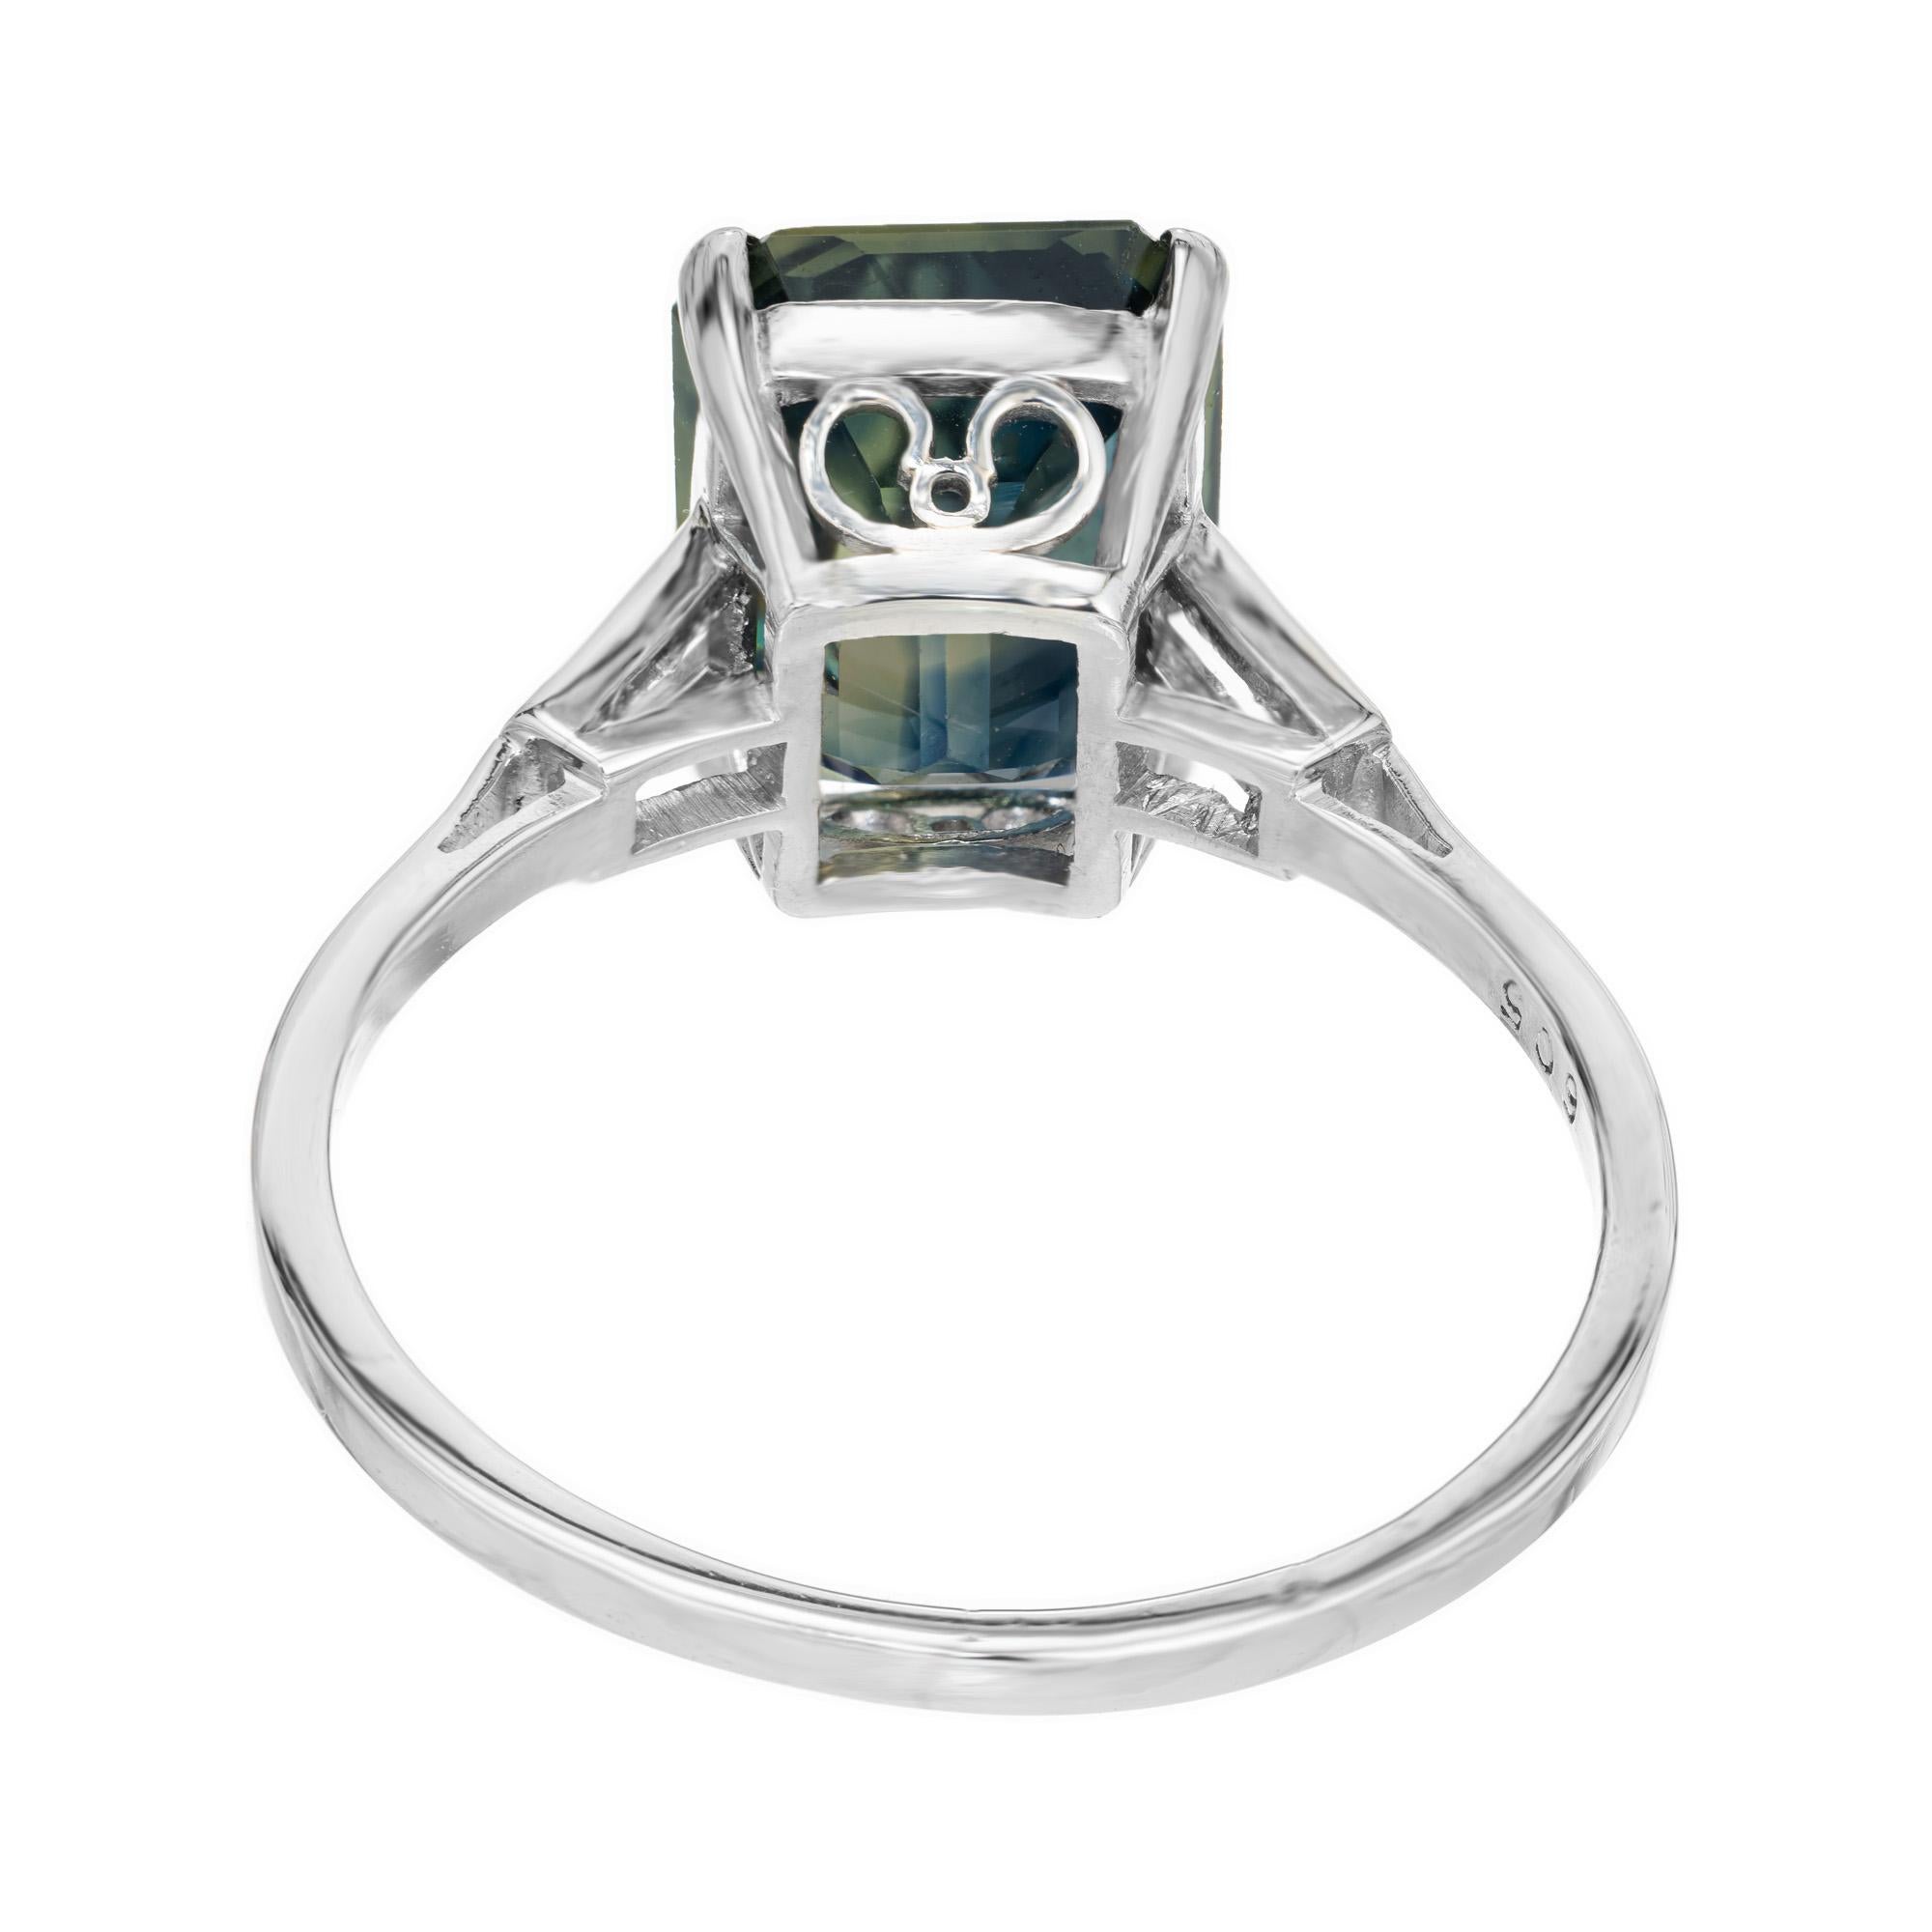 GIA 5.37 Carat Green Sapphire Diamond Three-Stone Engagement Platinum Ring In Good Condition For Sale In Stamford, CT